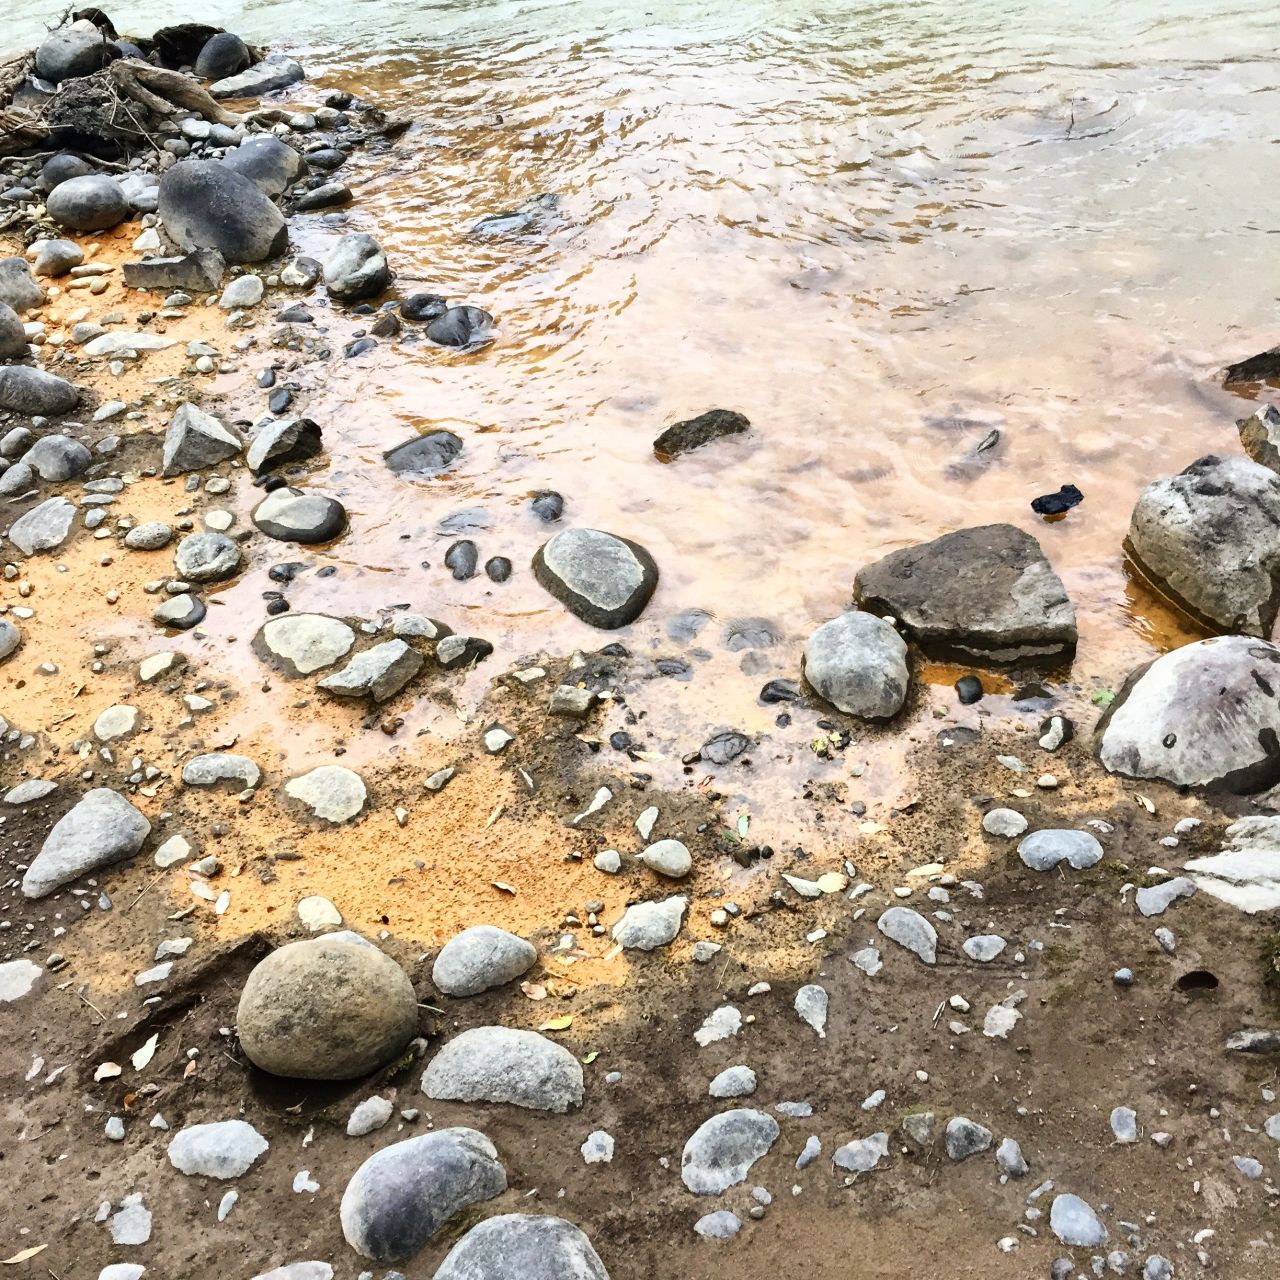 The spill caused a spike in concentrations of total and dissolved metals in the water, the EPA said. <a href="https://instagram.com/therealtechjeeper/" target="_blank" target="_blank">Matthew Evans</a> shot <a href="https://instagram.com/p/6MGJ6ajwVm/?taken-by=therealtechjeeper" target="_blank" target="_blank">this photo</a> August 7.